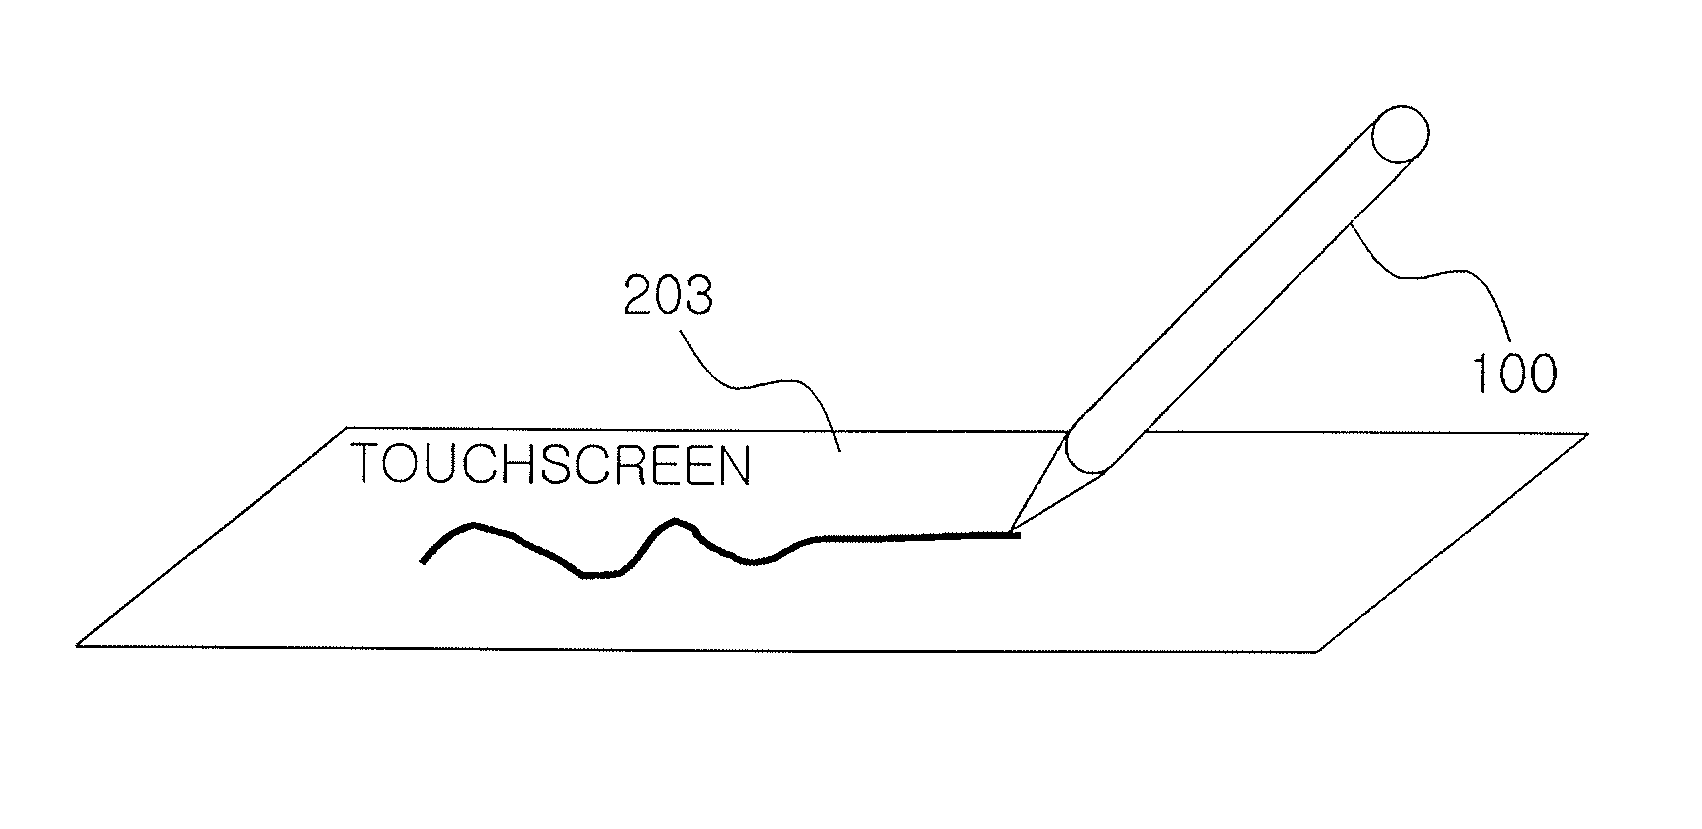 Pointing apparatus capable of providing haptic feedback, and haptic interaction system and method using the same